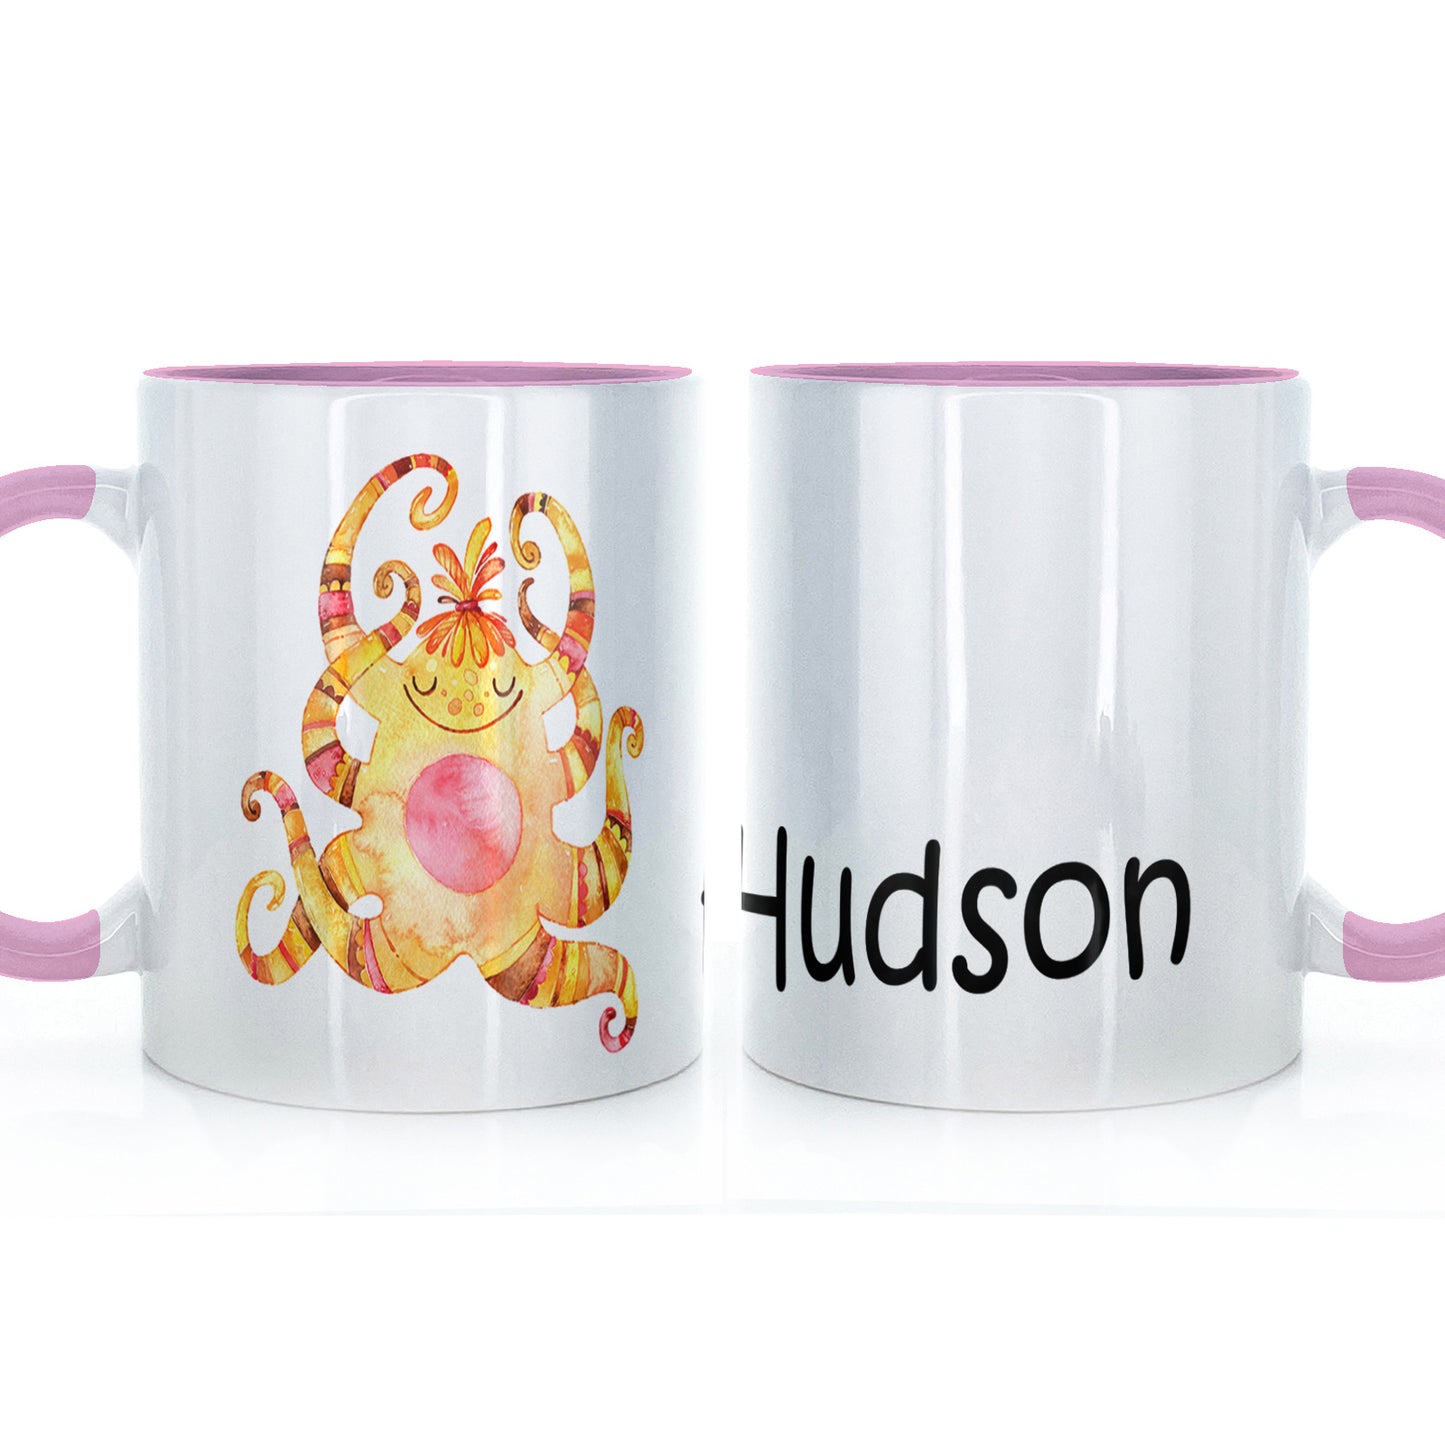 Personalised Mug with Childish Text and Tentacled Yellow Monster